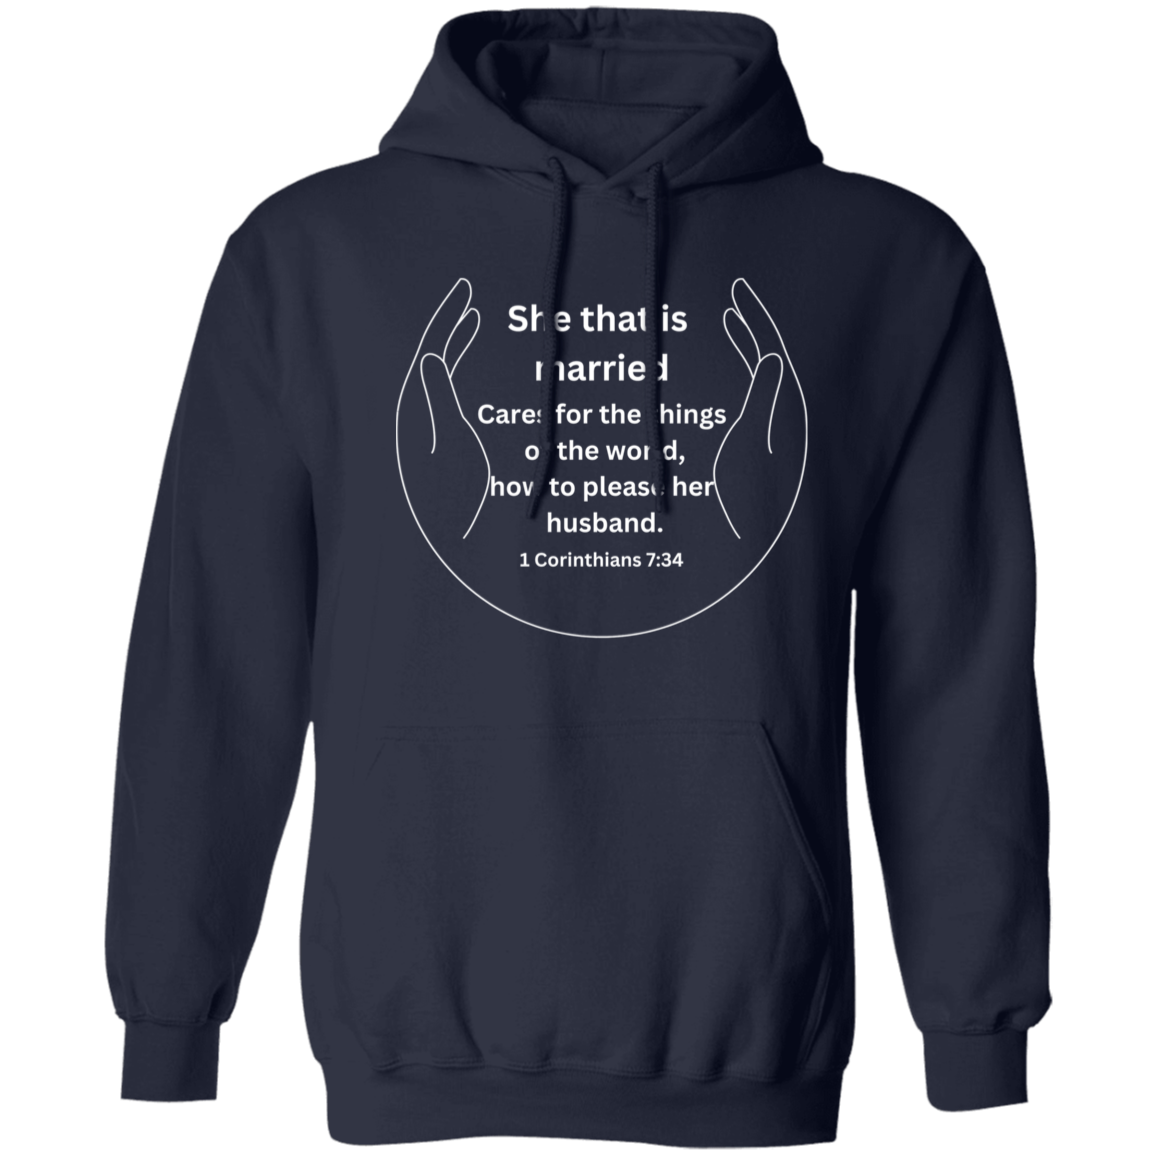 She that is married hoodies